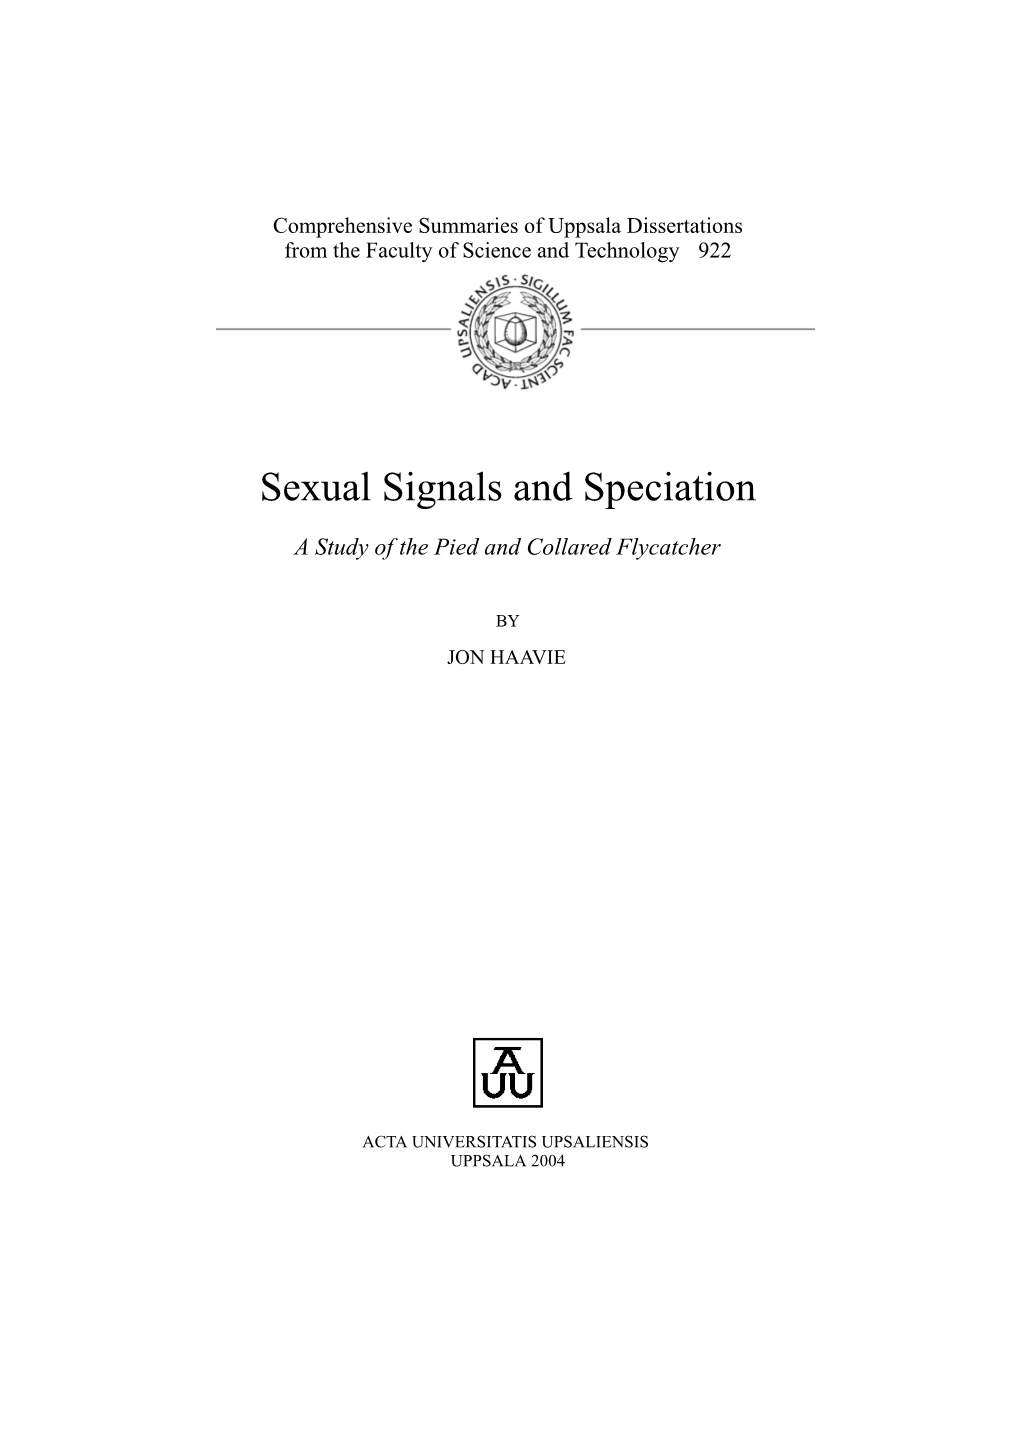 Sexual Signals and Speciation